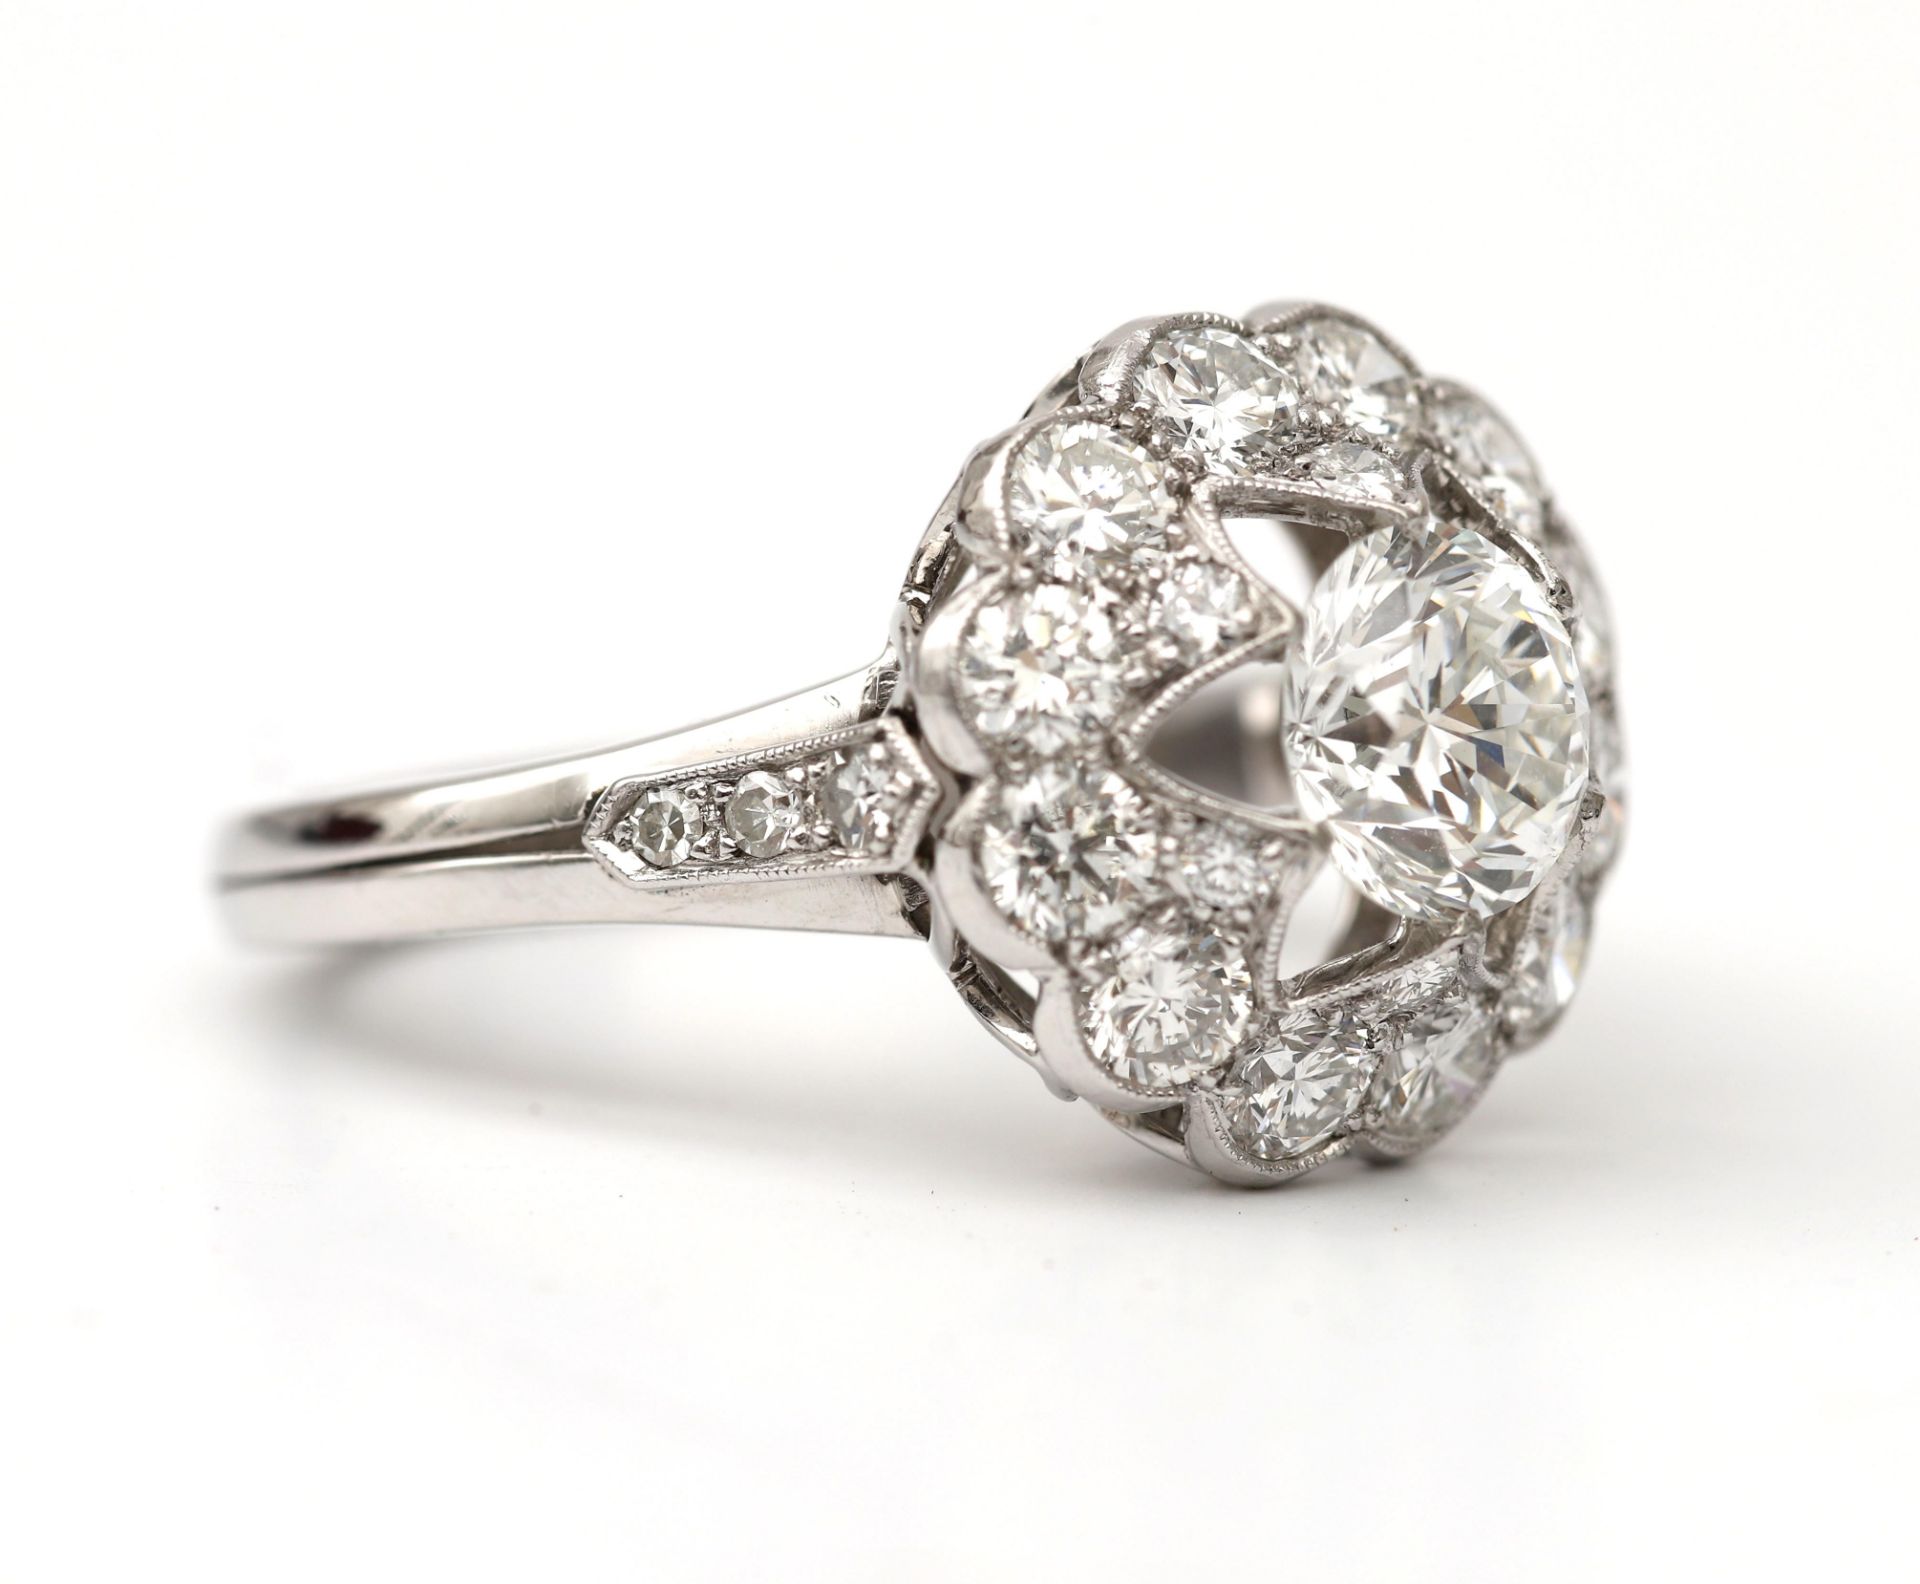 A 14 karat white gold with platinum rosette ring, set with diamonds, in total approx. 2.21ct. - Image 6 of 10